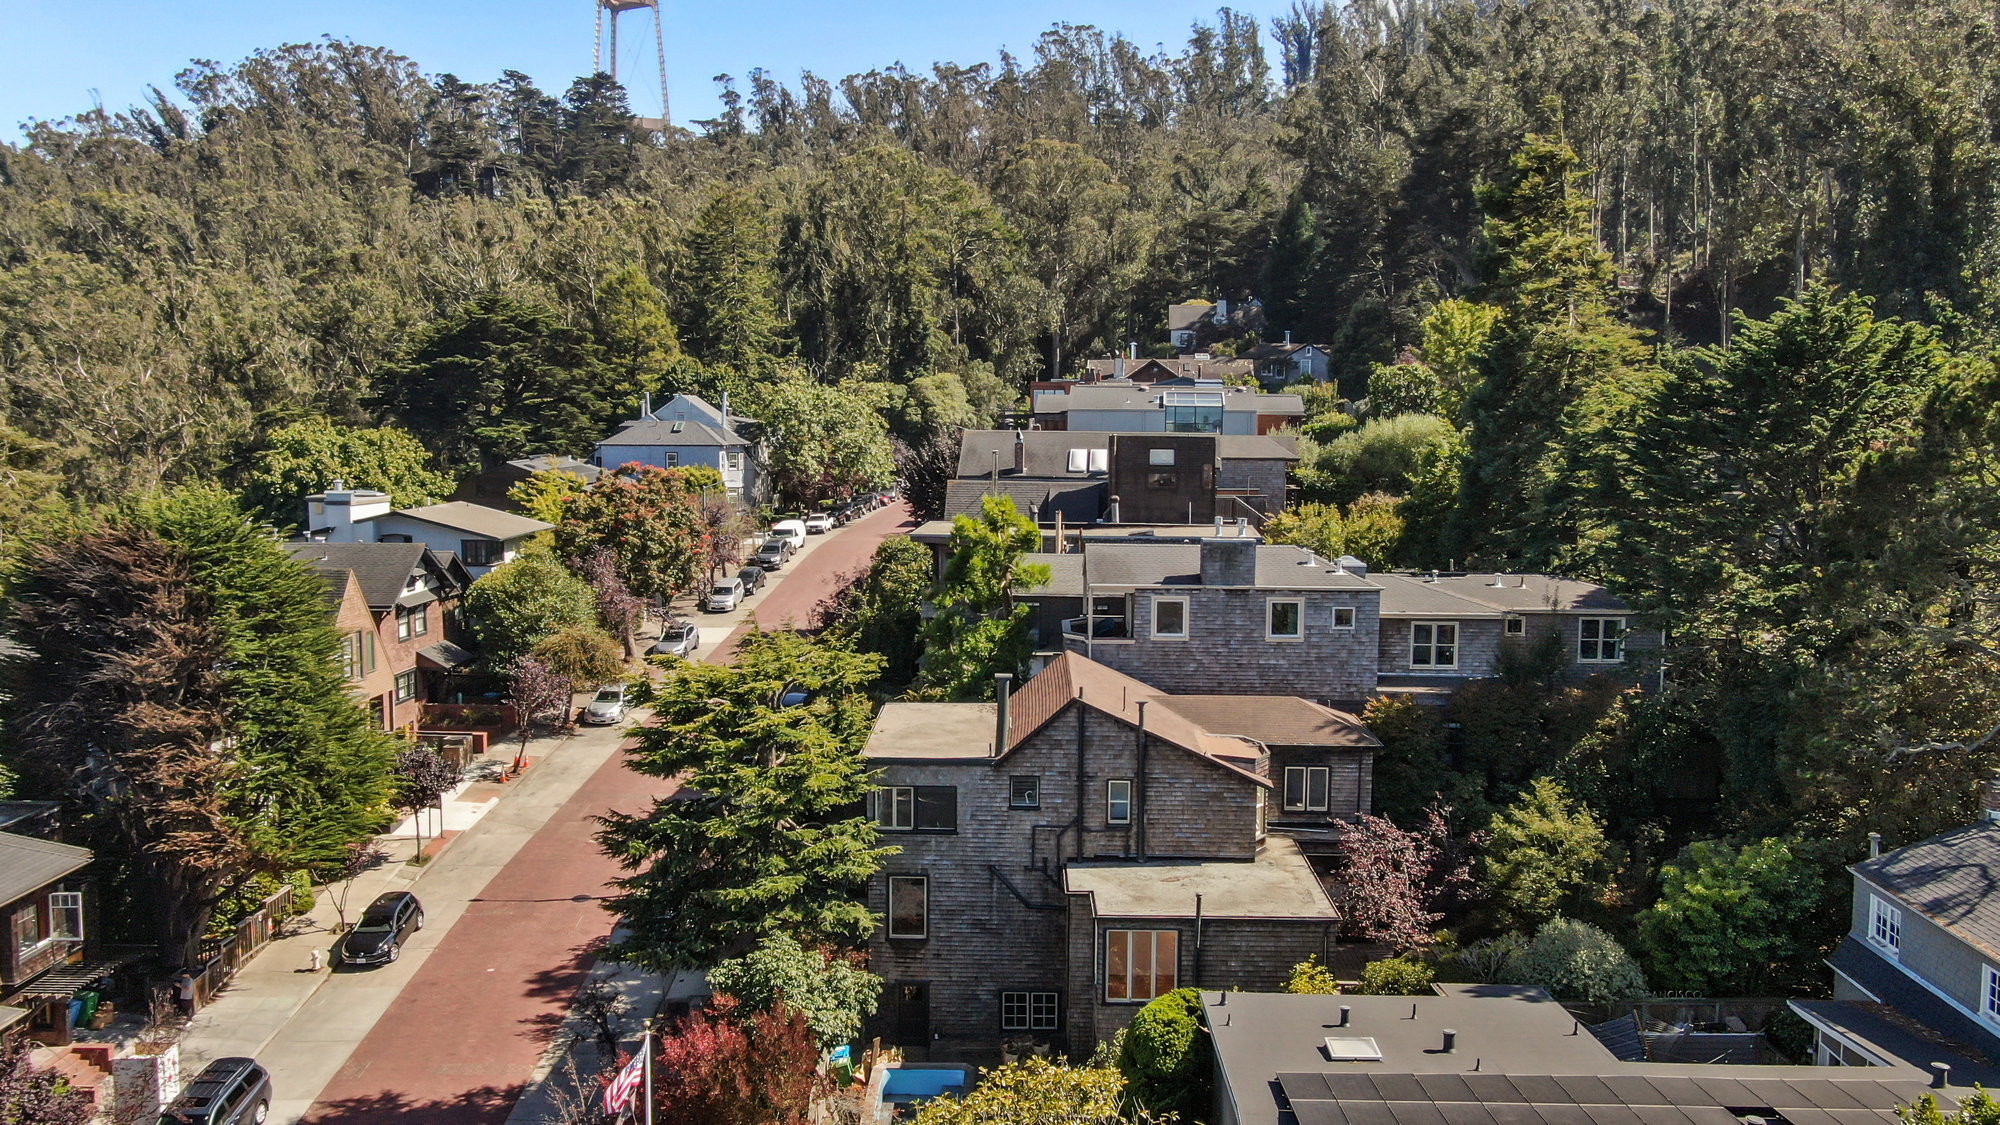 Property Photo: Close-up aerial view of 183 Edgewood Avenue, showing a home with wood facade